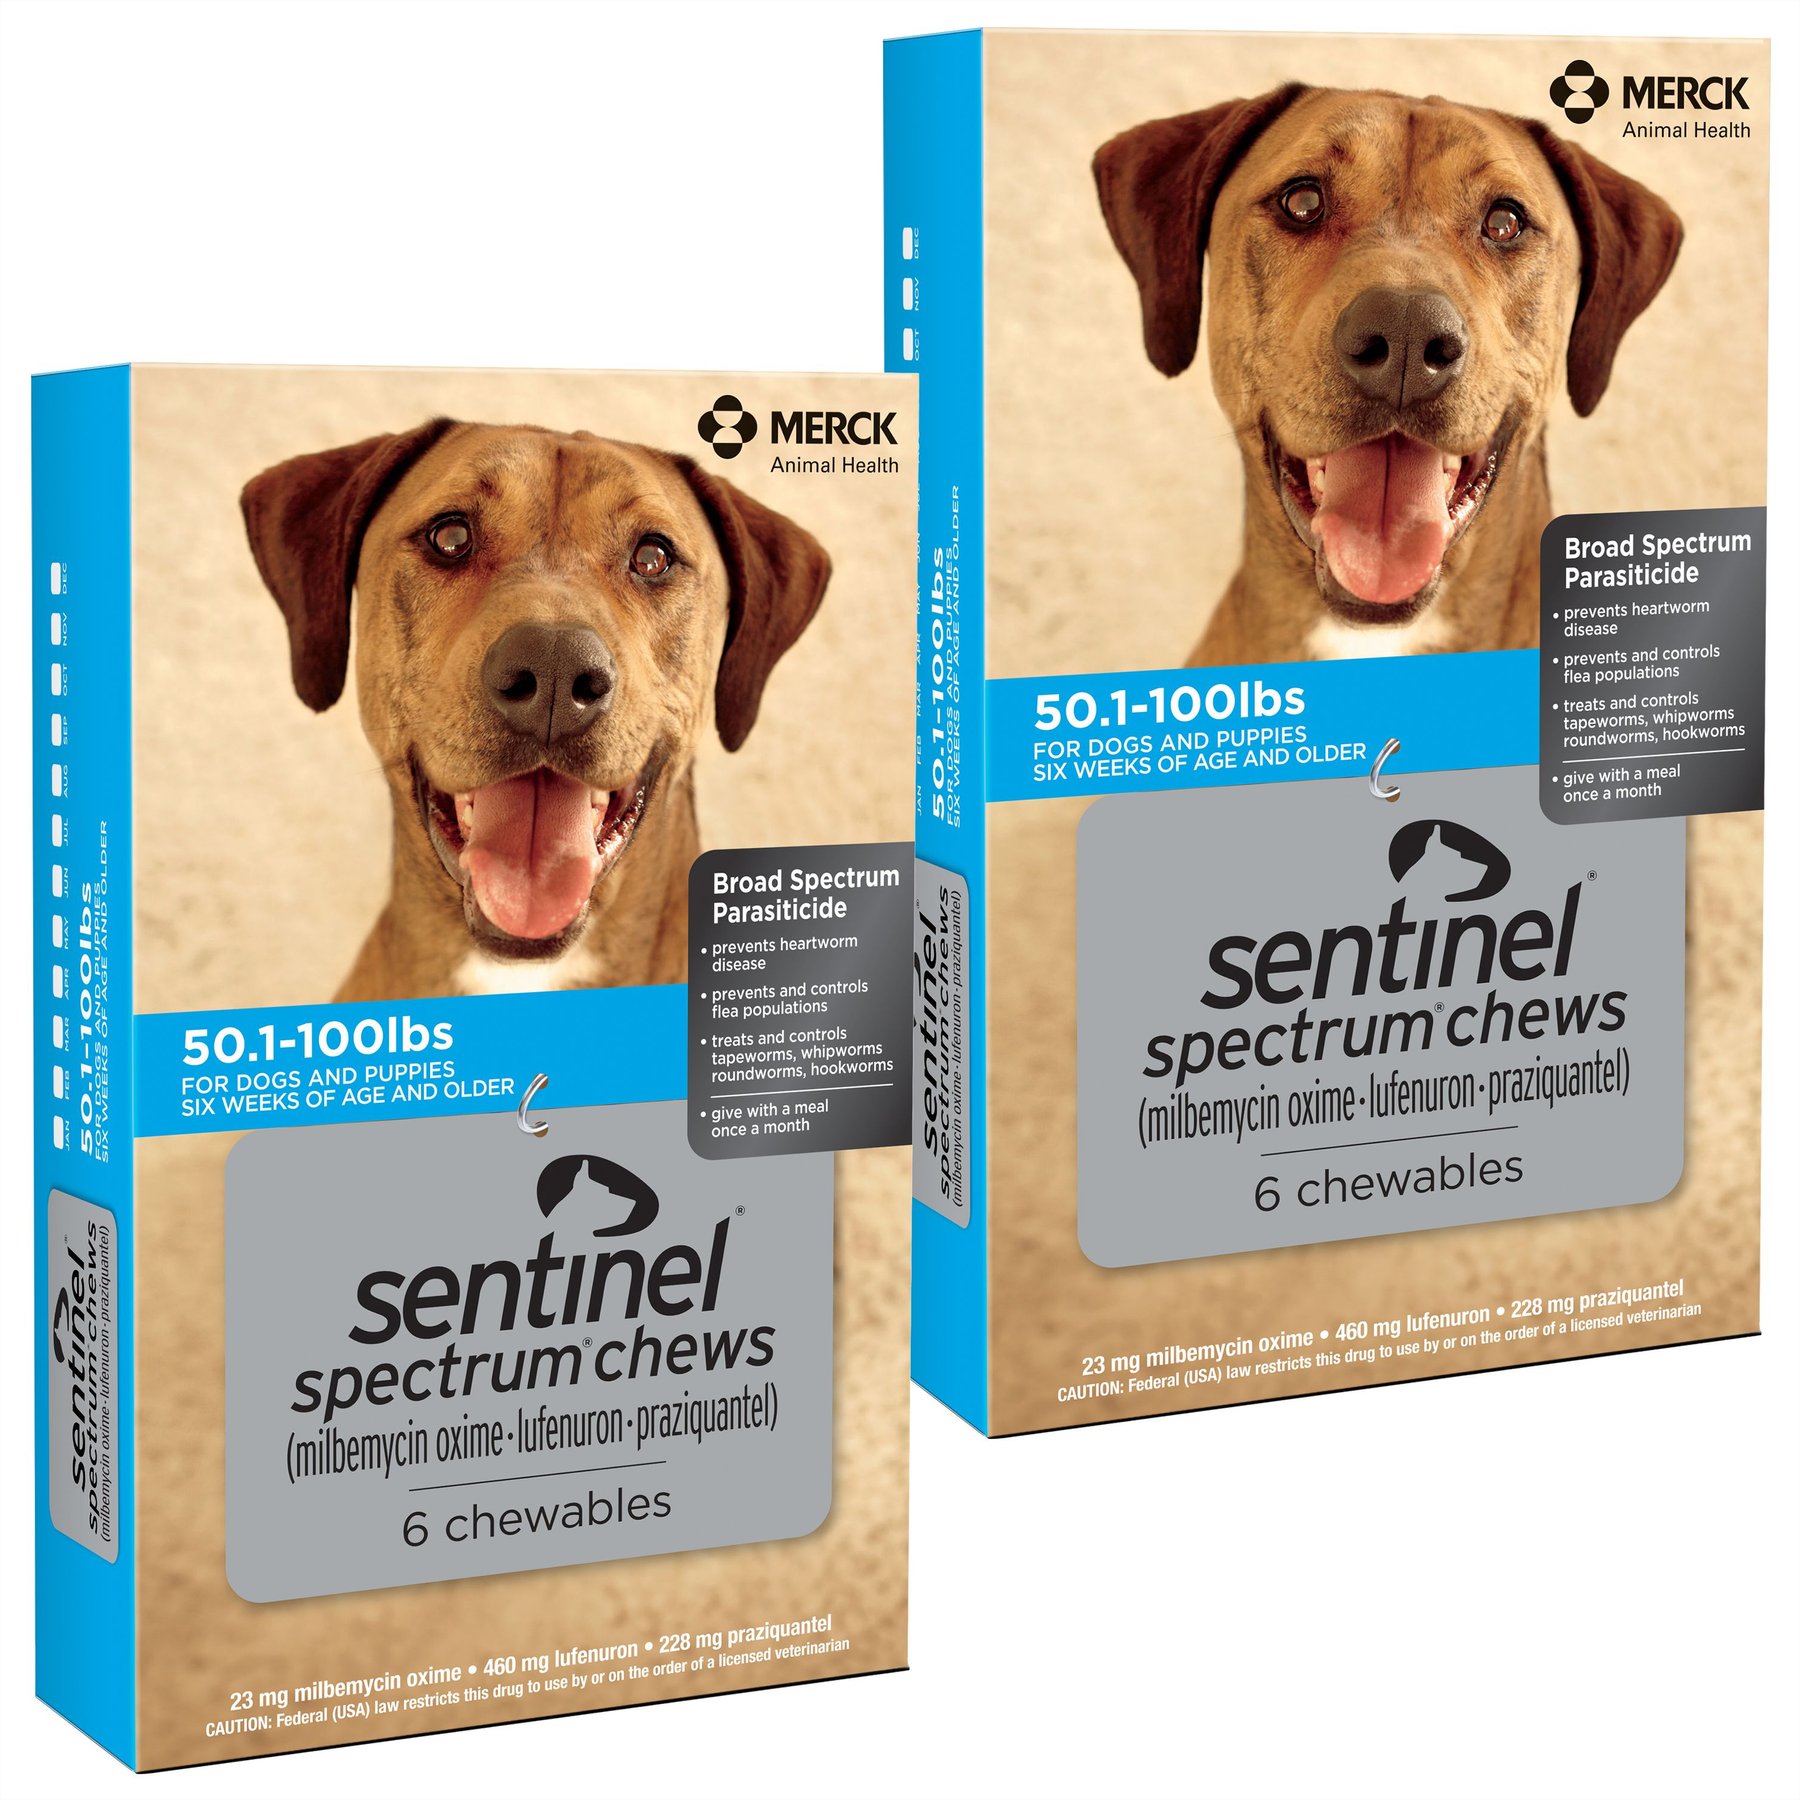 Sentinel Spectrum for Dogs 8.1-25 lbs (6 Chews)